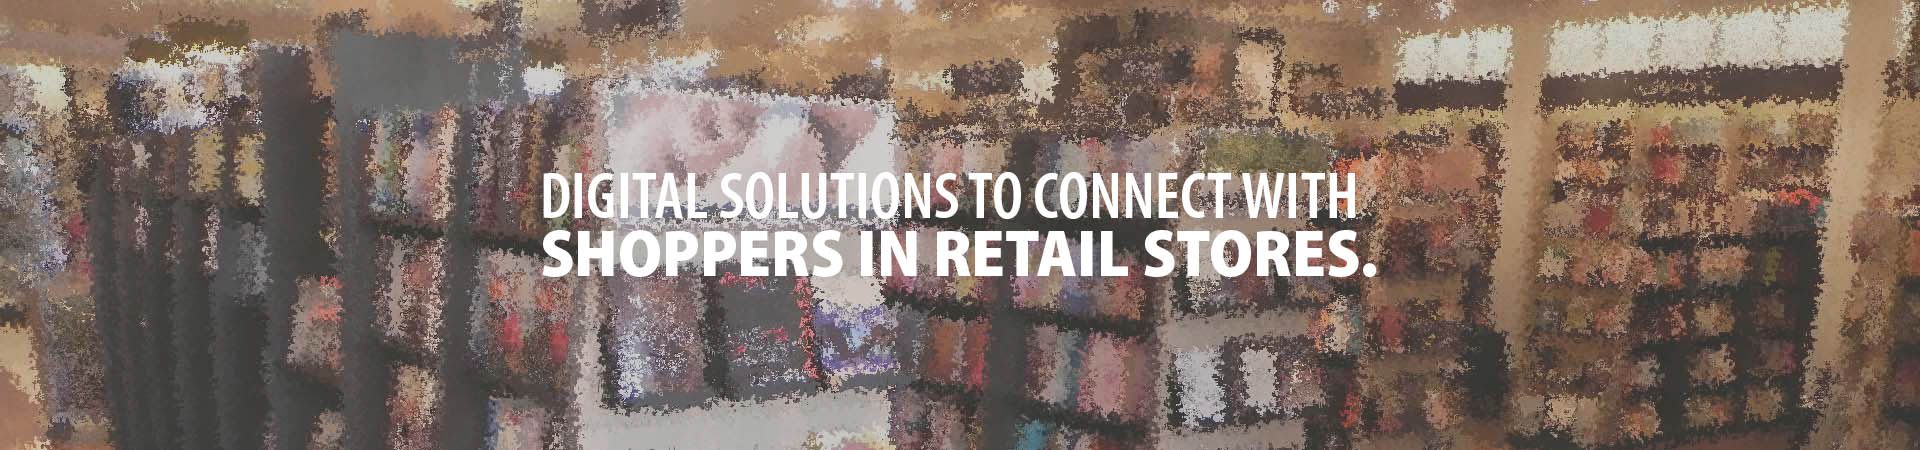 Digital solutions to connect with shoppers in retail stores.